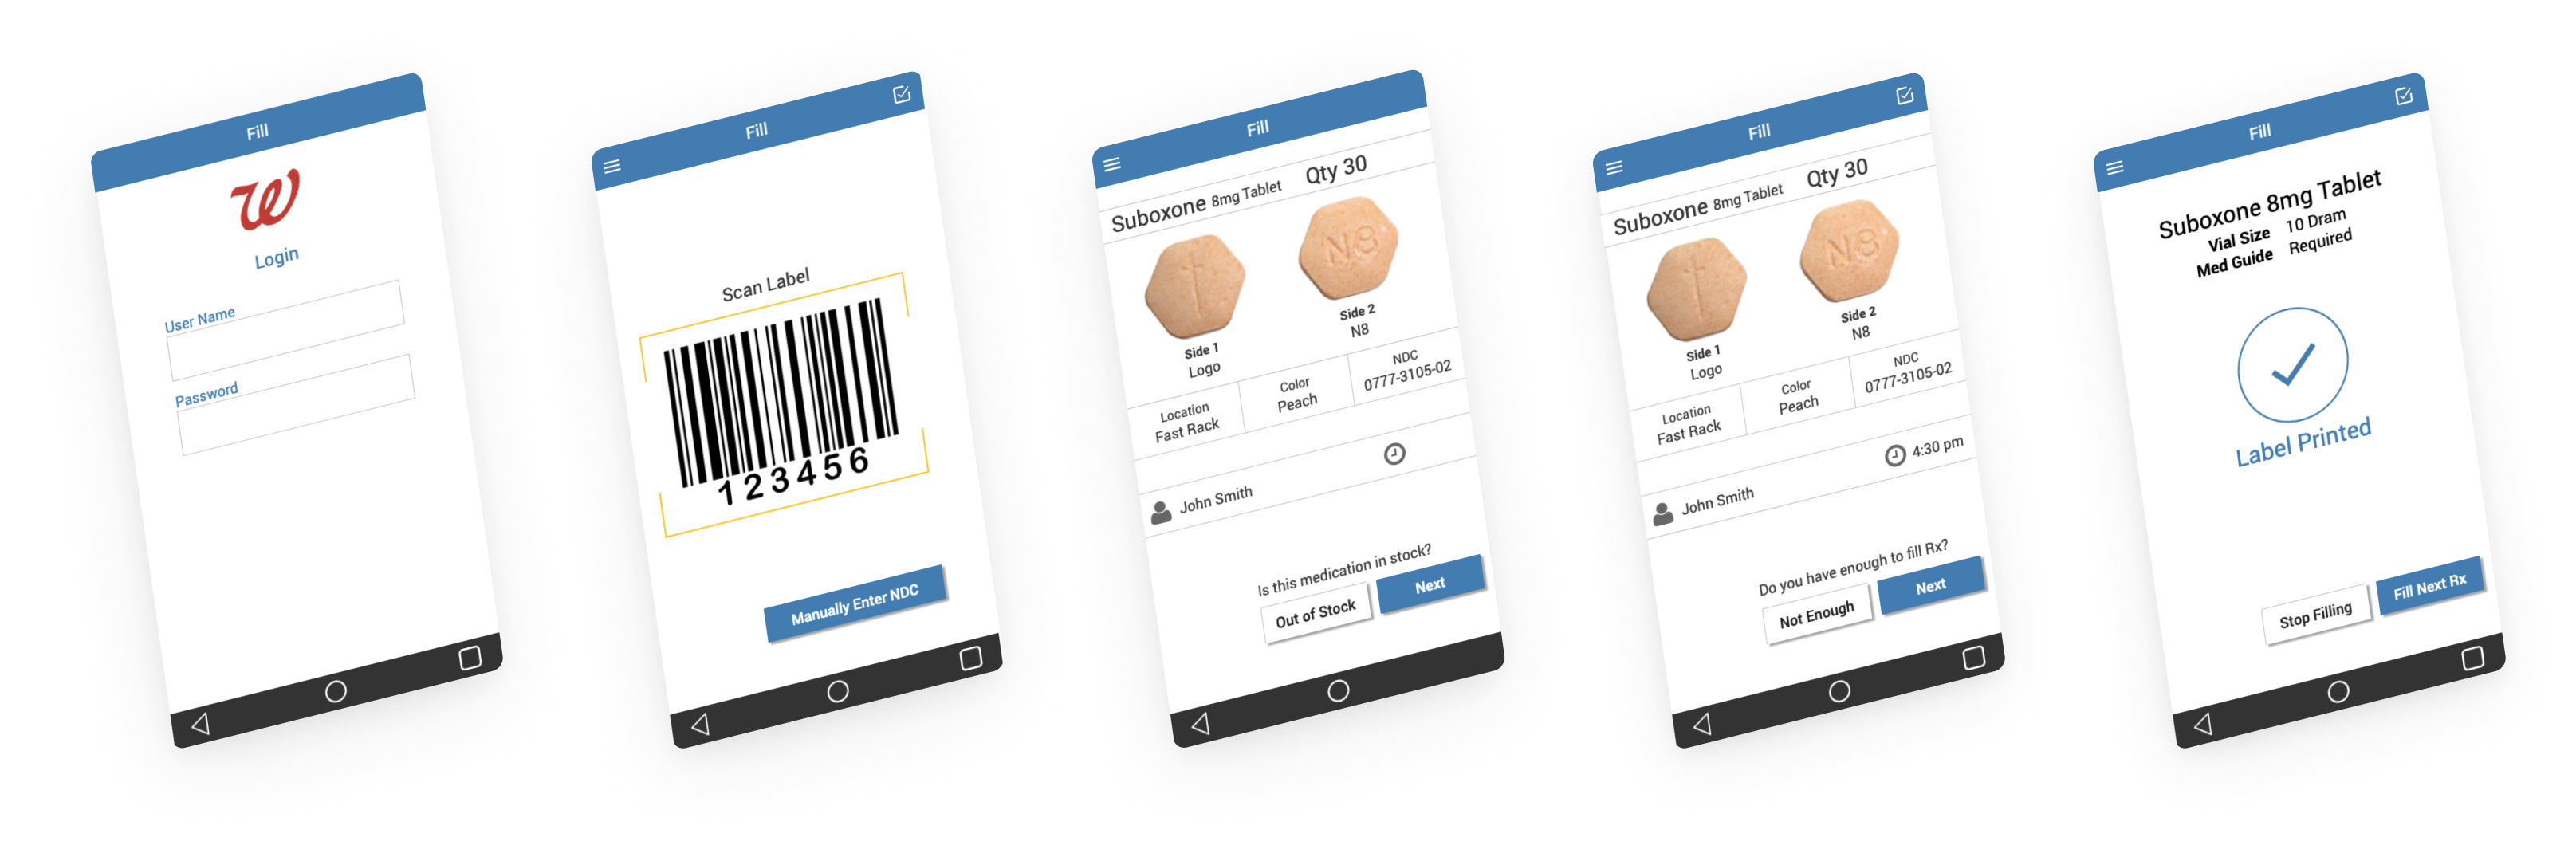 Original mobile screens for the assembly application. These were designed for a handheld Zebra device using the Android framework as a model for the platform we would eventually use in pilot testing. This first iteration was based on wireframes developed in Axure.